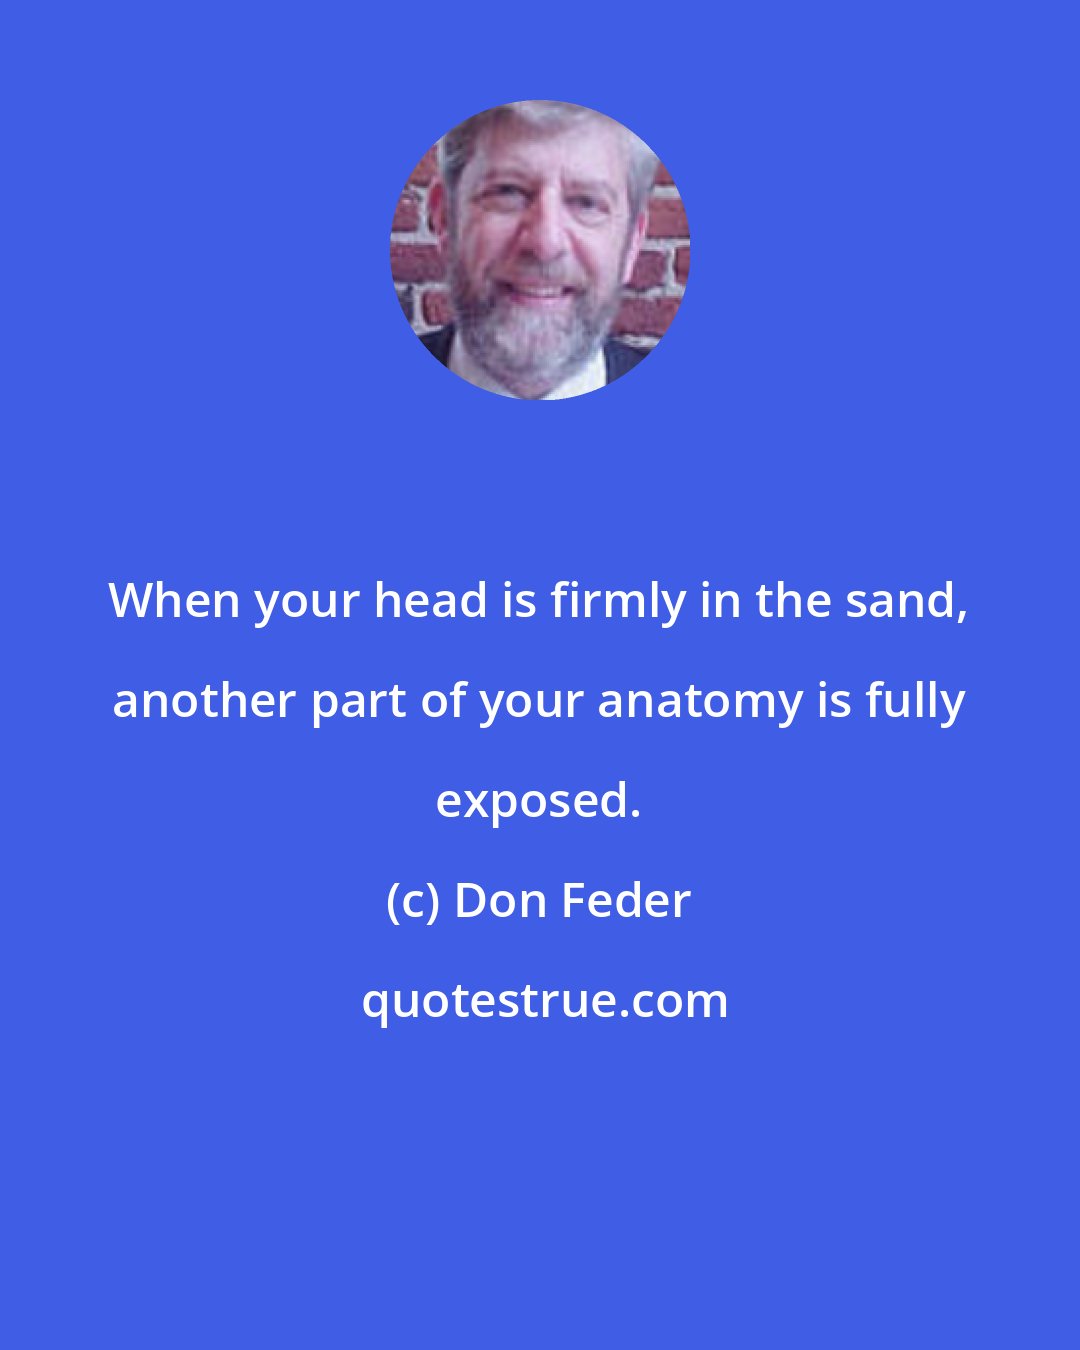 Don Feder: When your head is firmly in the sand, another part of your anatomy is fully exposed.